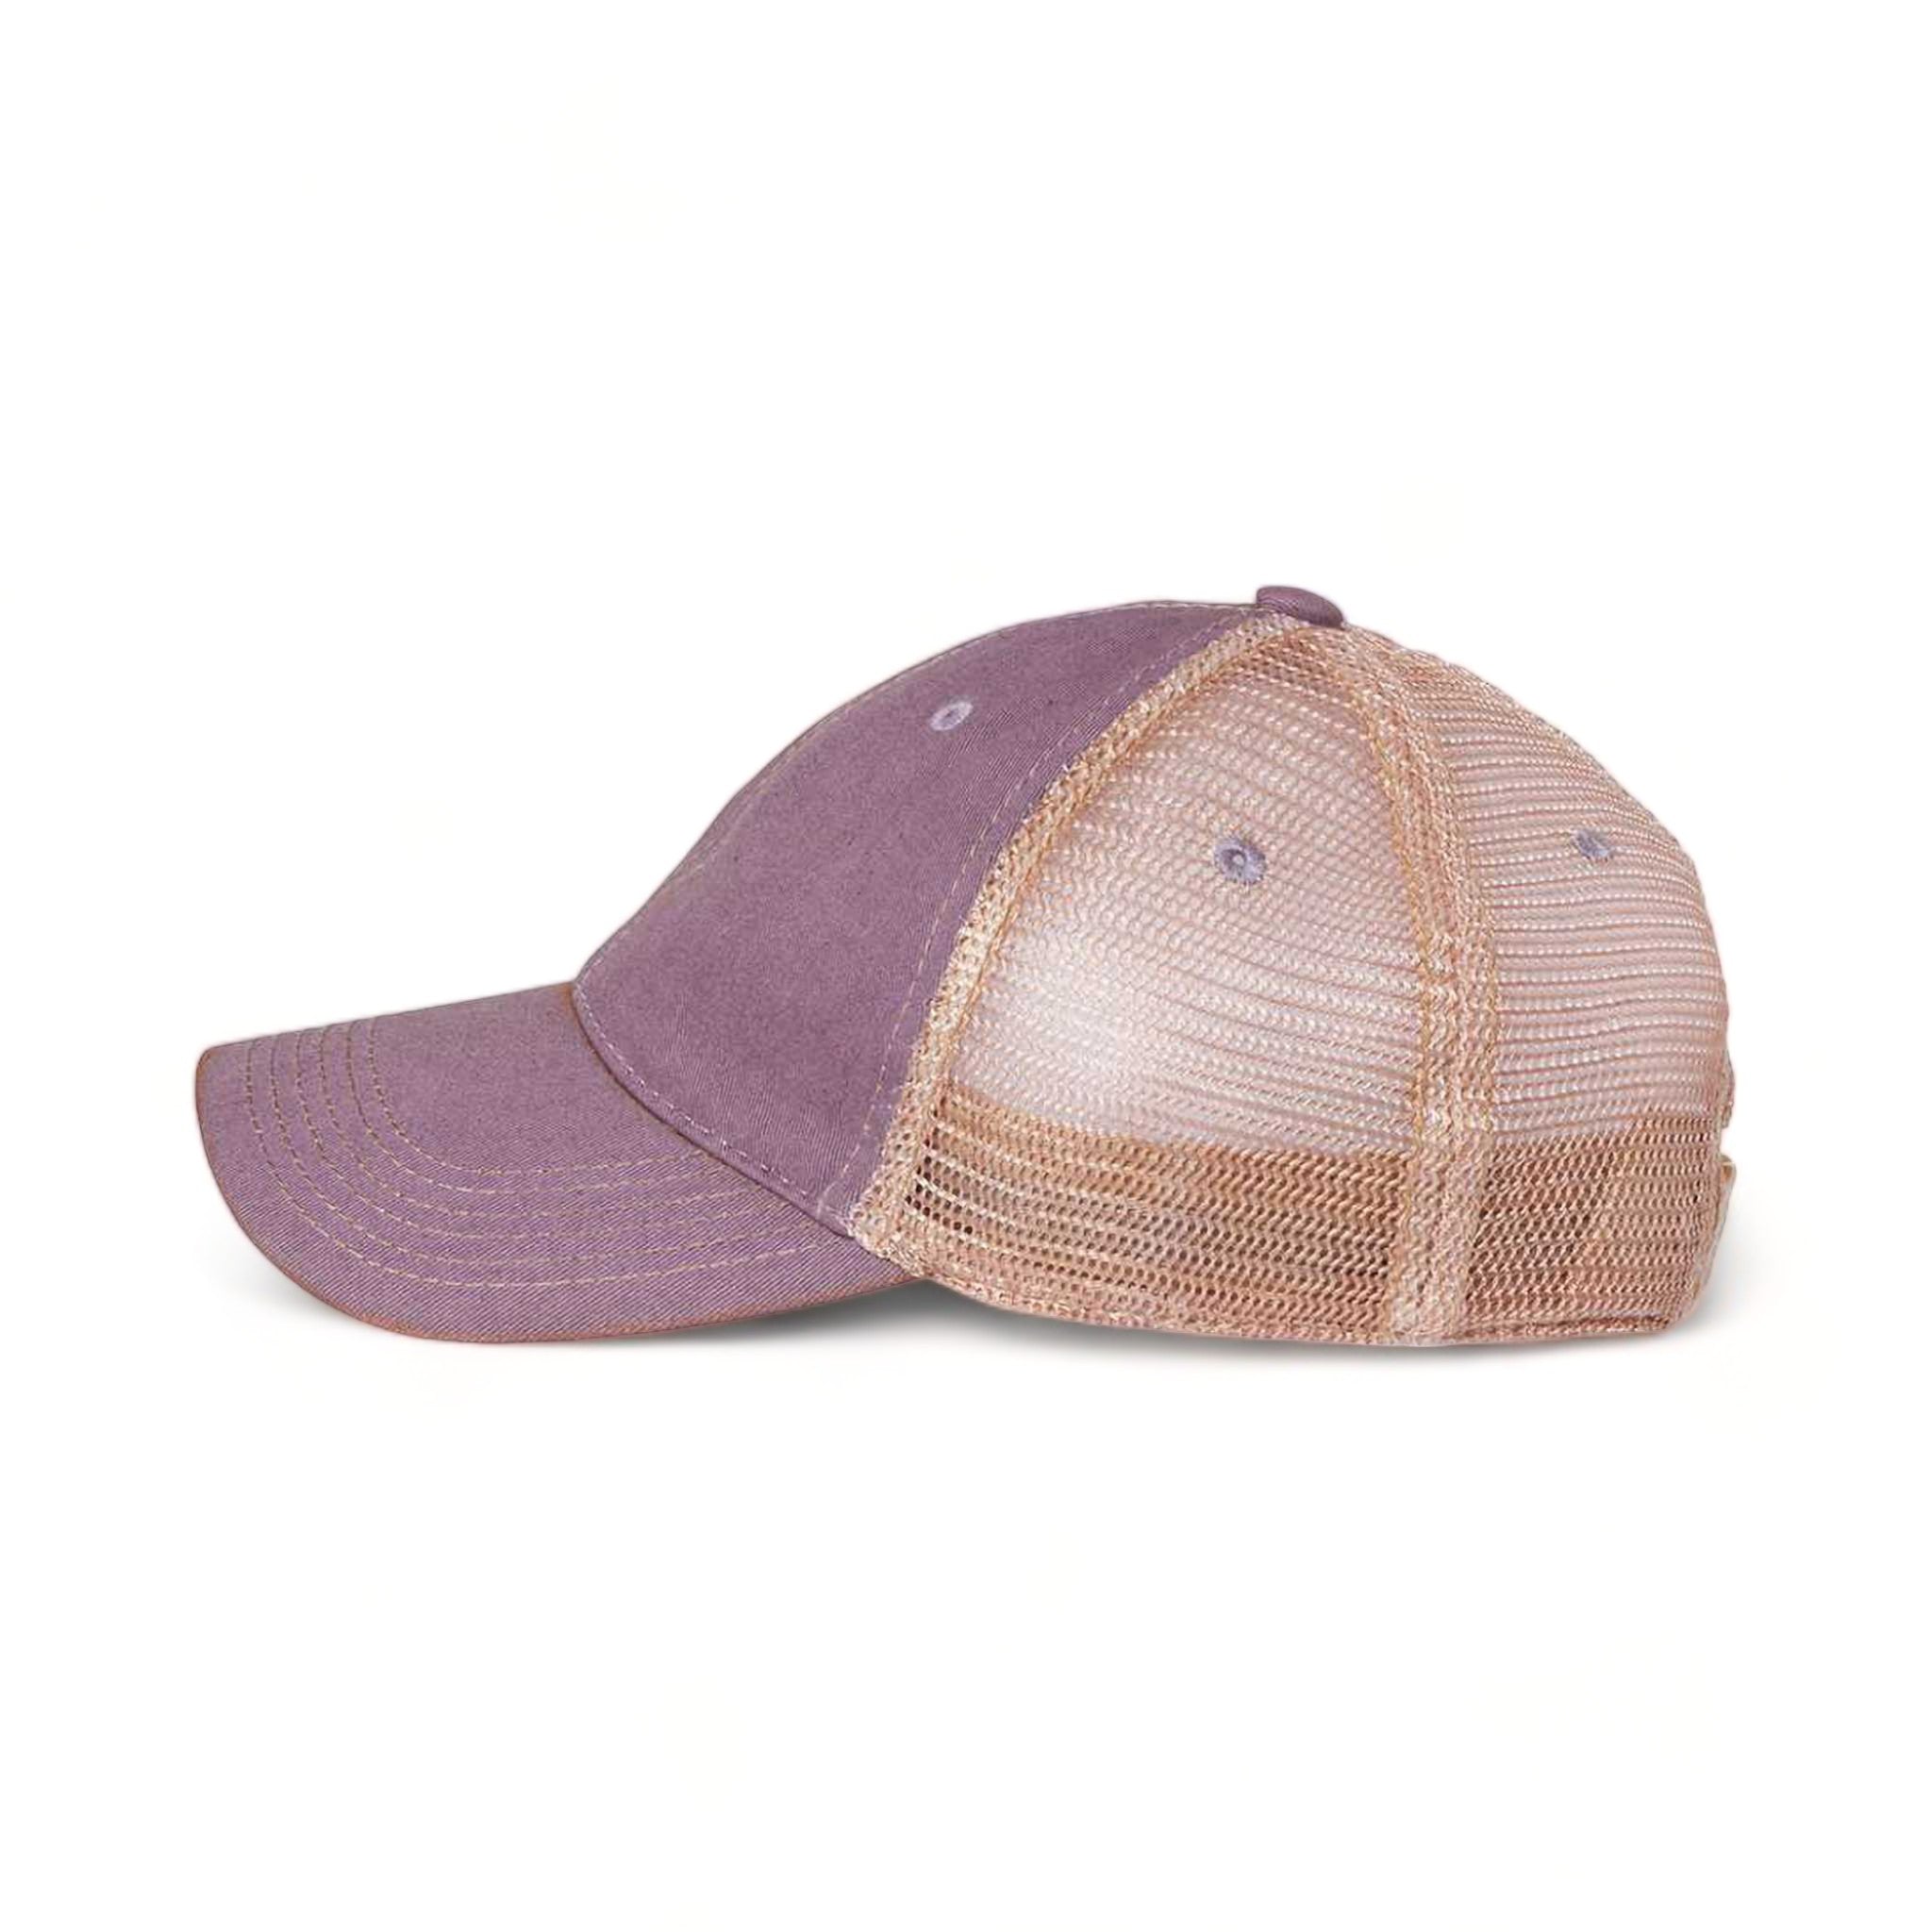 Side view of LEGACY OFA custom hat in lavender and khaki